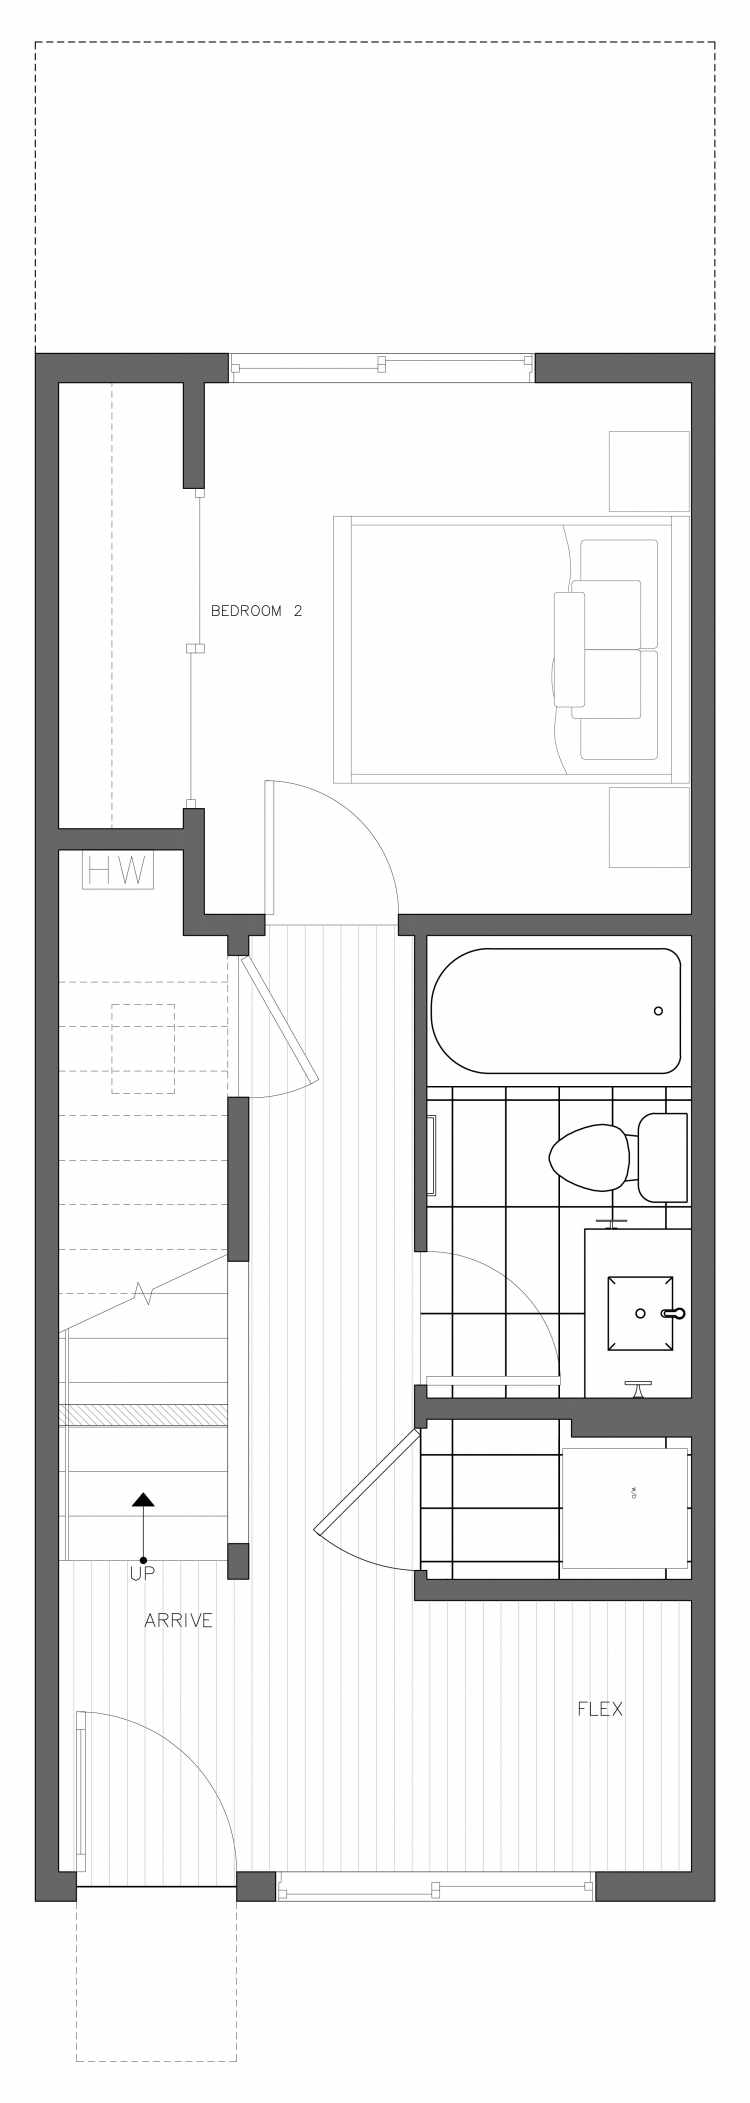 First Floor Plan of 3406B 15th Ave W, One of the Arlo Townhomes in North Queen Anne